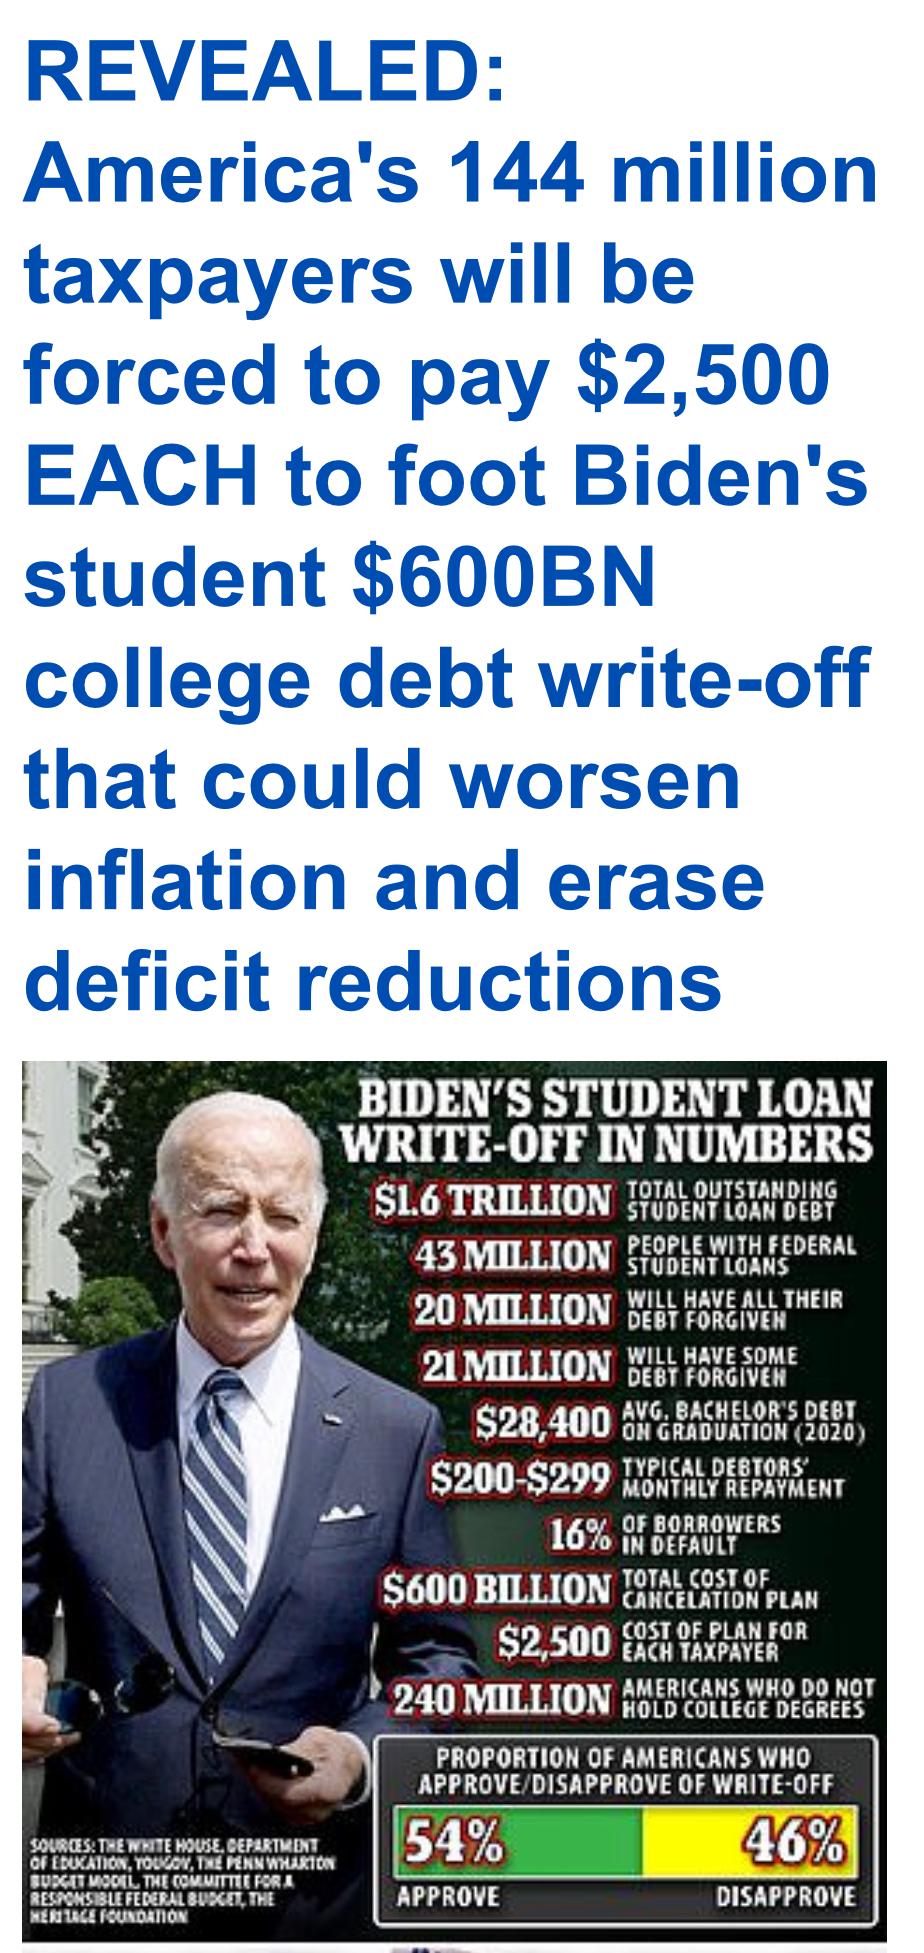 2-500-per-taxpayer-bill-to-pay-for-biden-s-student-debt-effort-to-buy